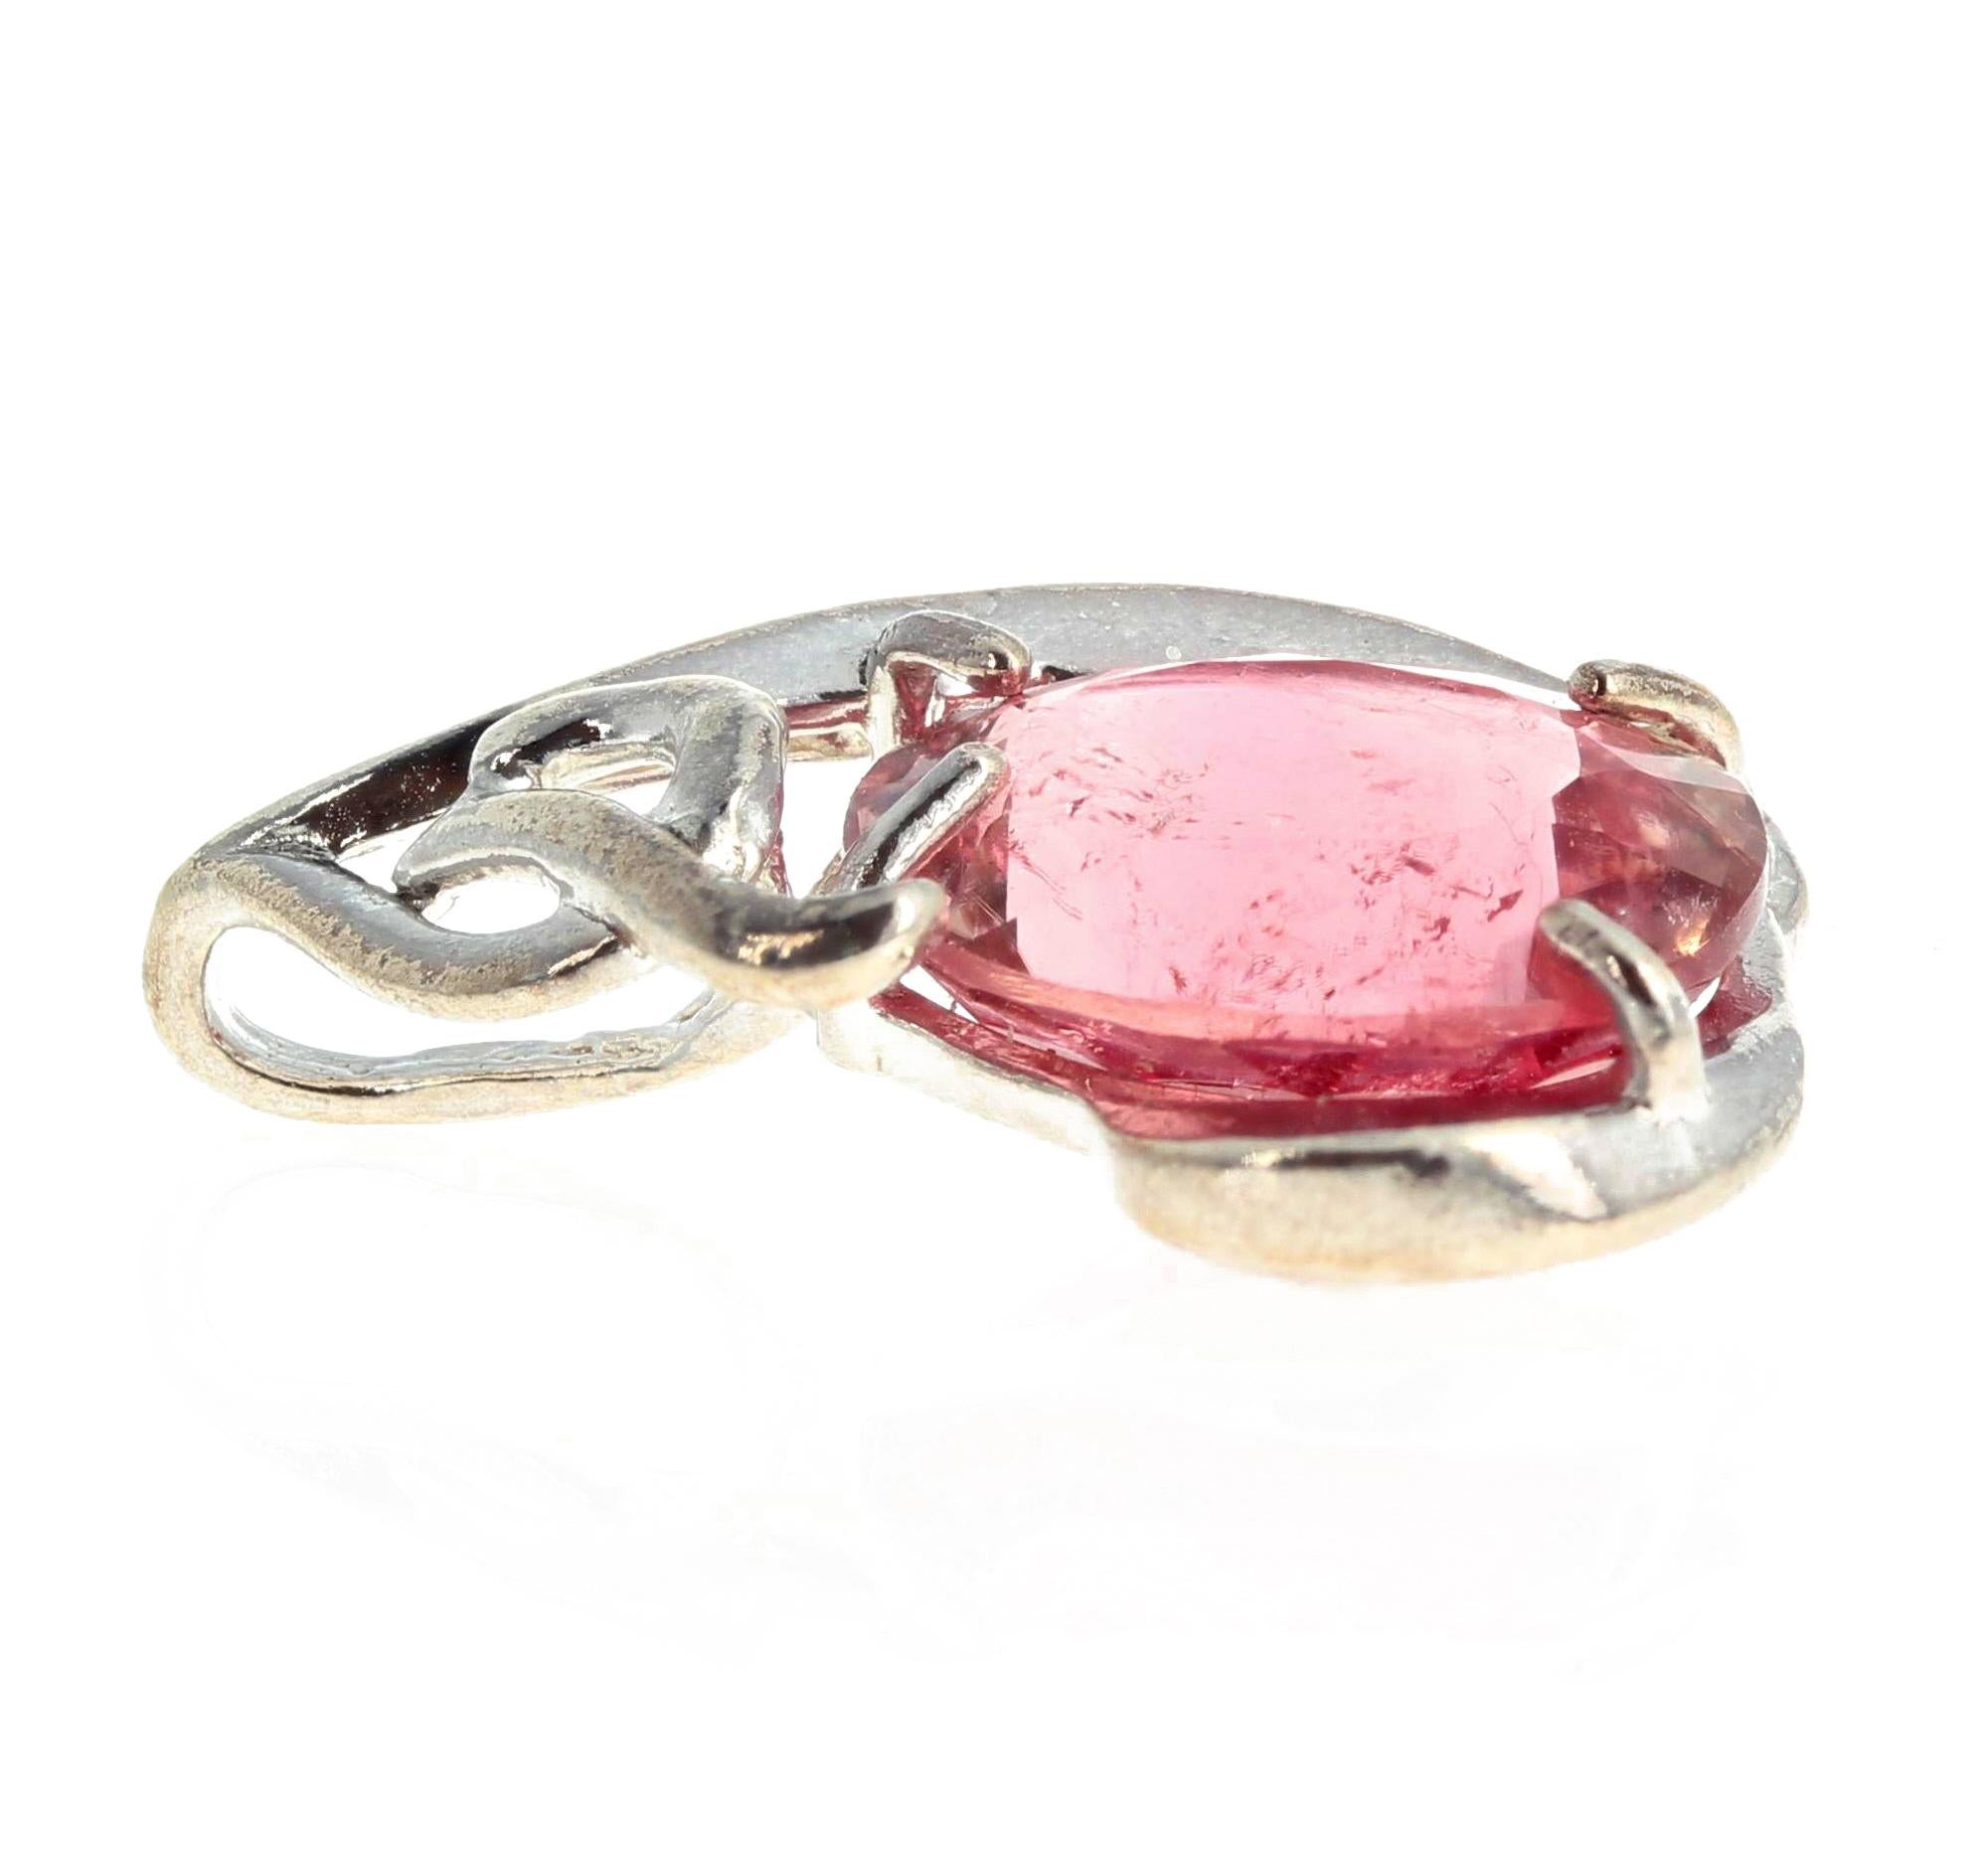 AJD Stunning 7 Cts Bright Pink/Apricot Natural Tourmaline Silver Pendant In New Condition For Sale In Raleigh, NC